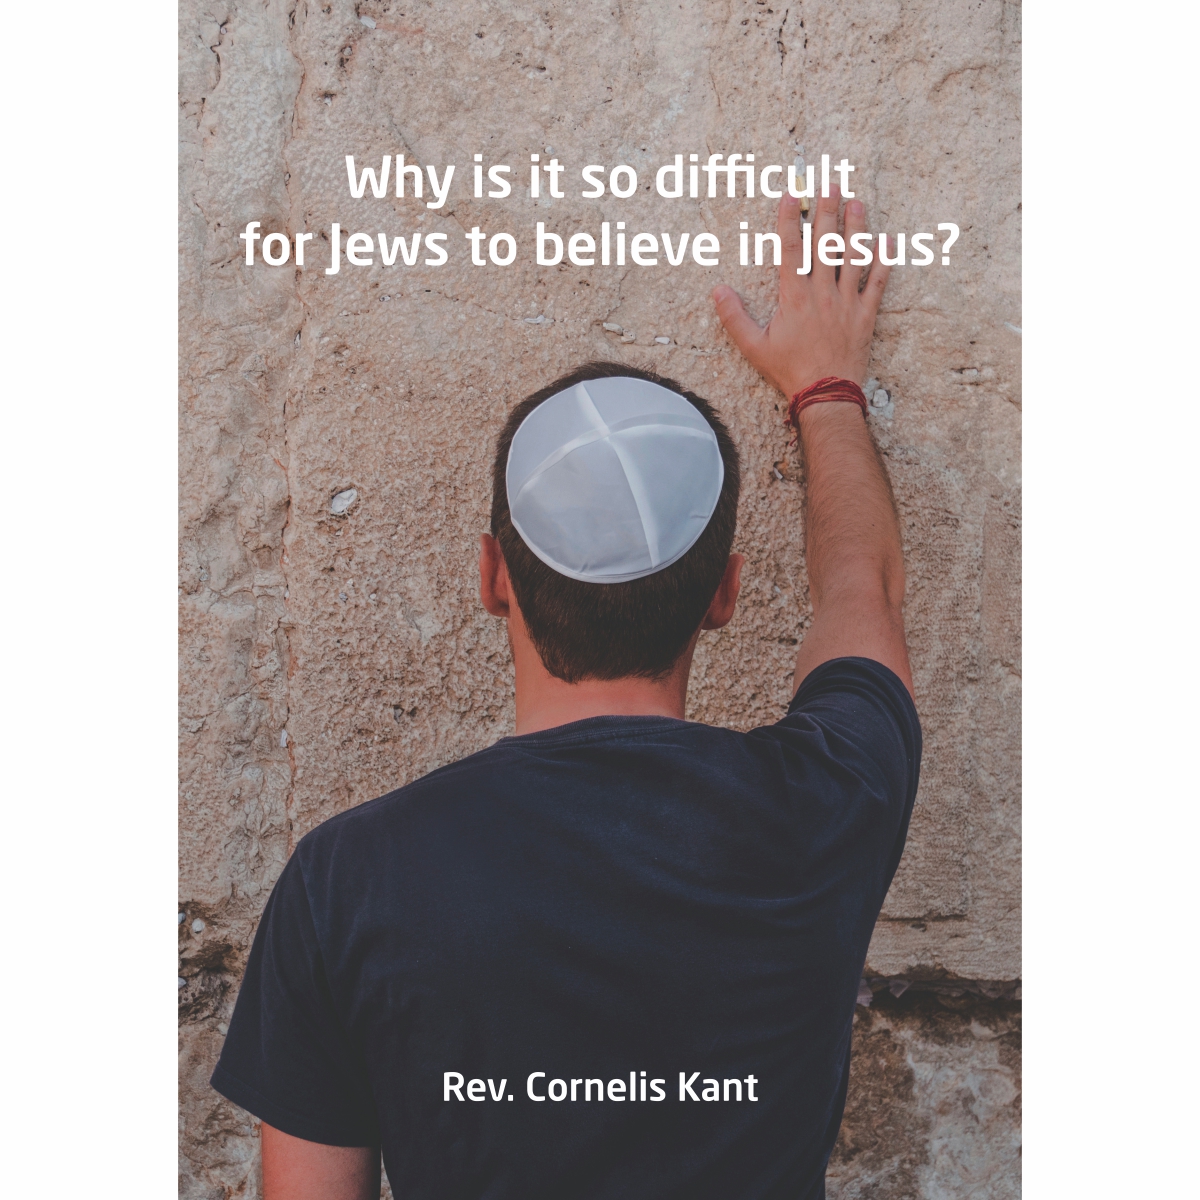 Why is it so difficult for Jews to believe in Jesus